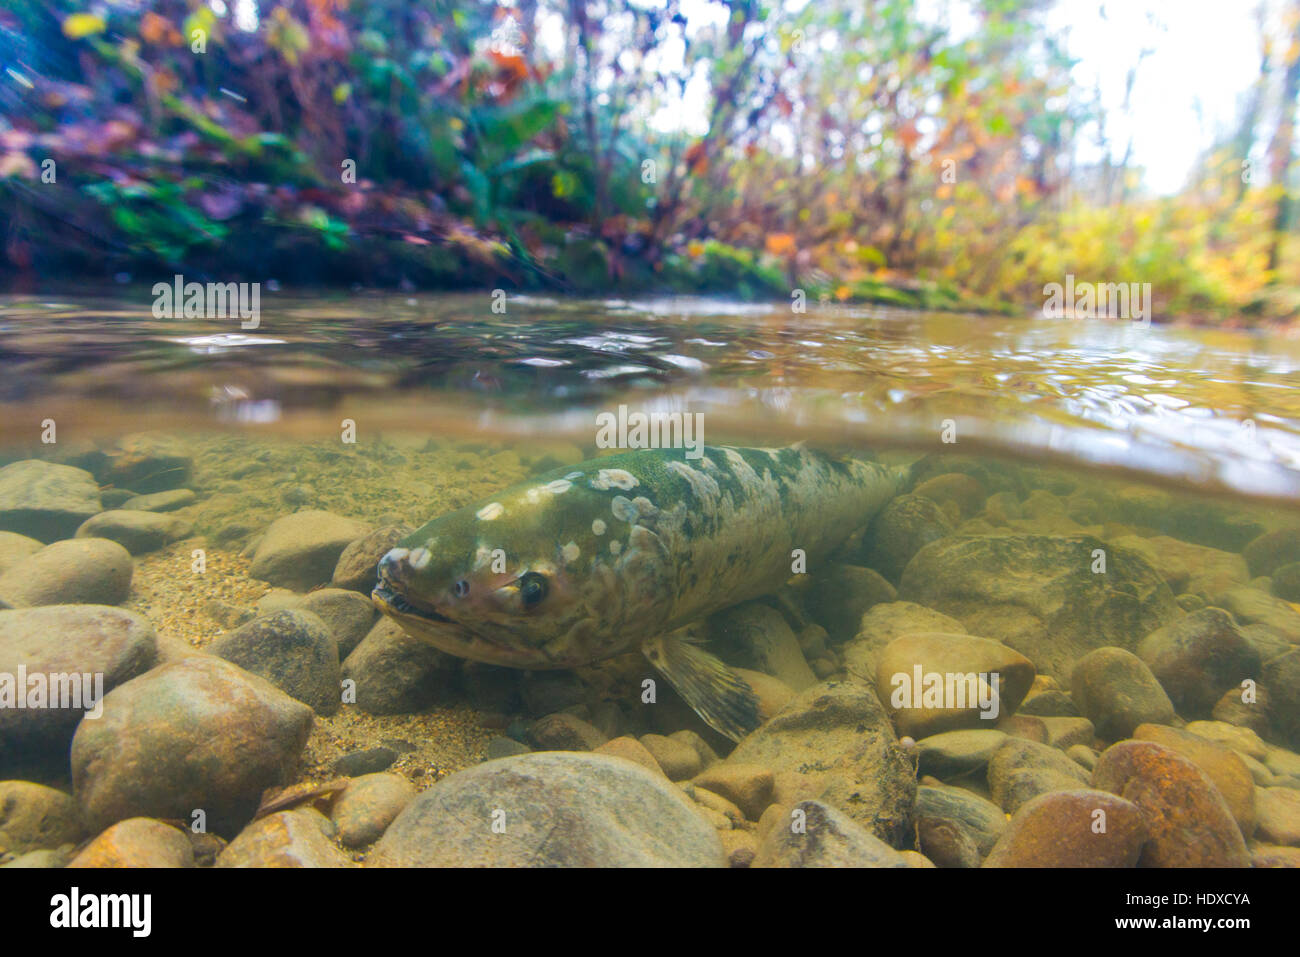 Dying Chum salmon just after spawning. Stock Photo